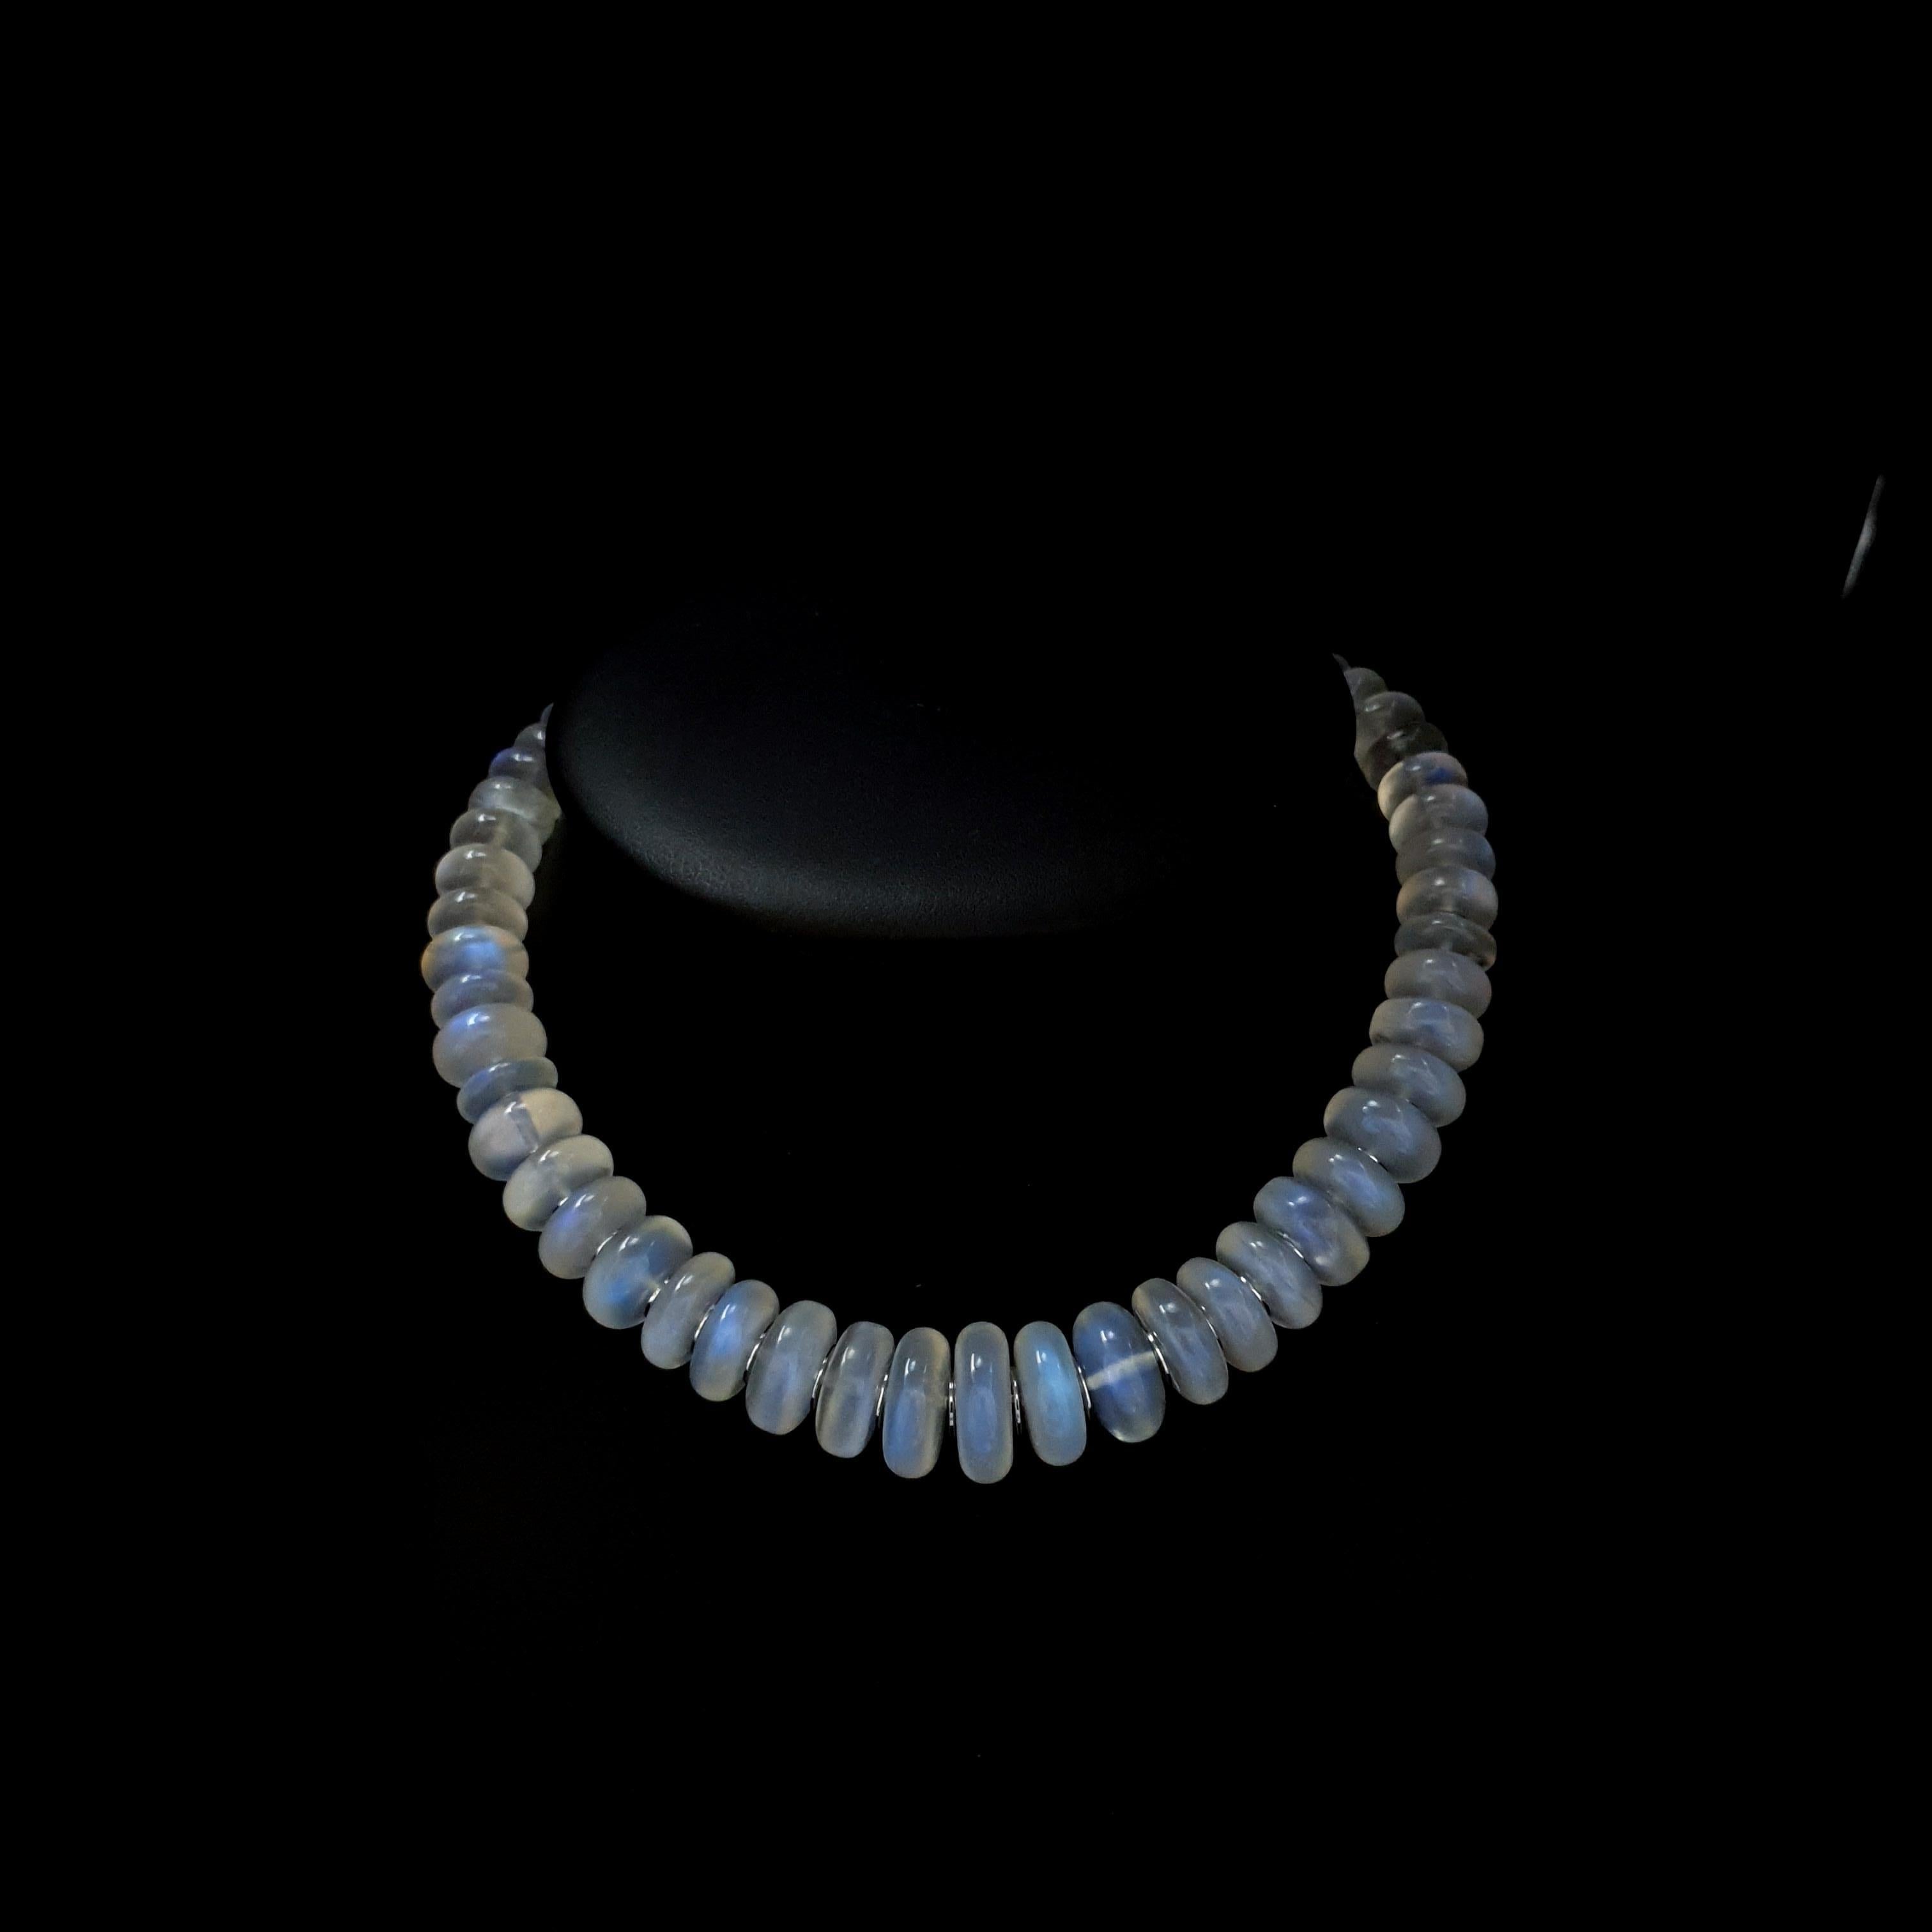 Blue Moonstone Rondel Beaded Necklace with 18 Carat White Gold Discs & Clasp For Sale 1